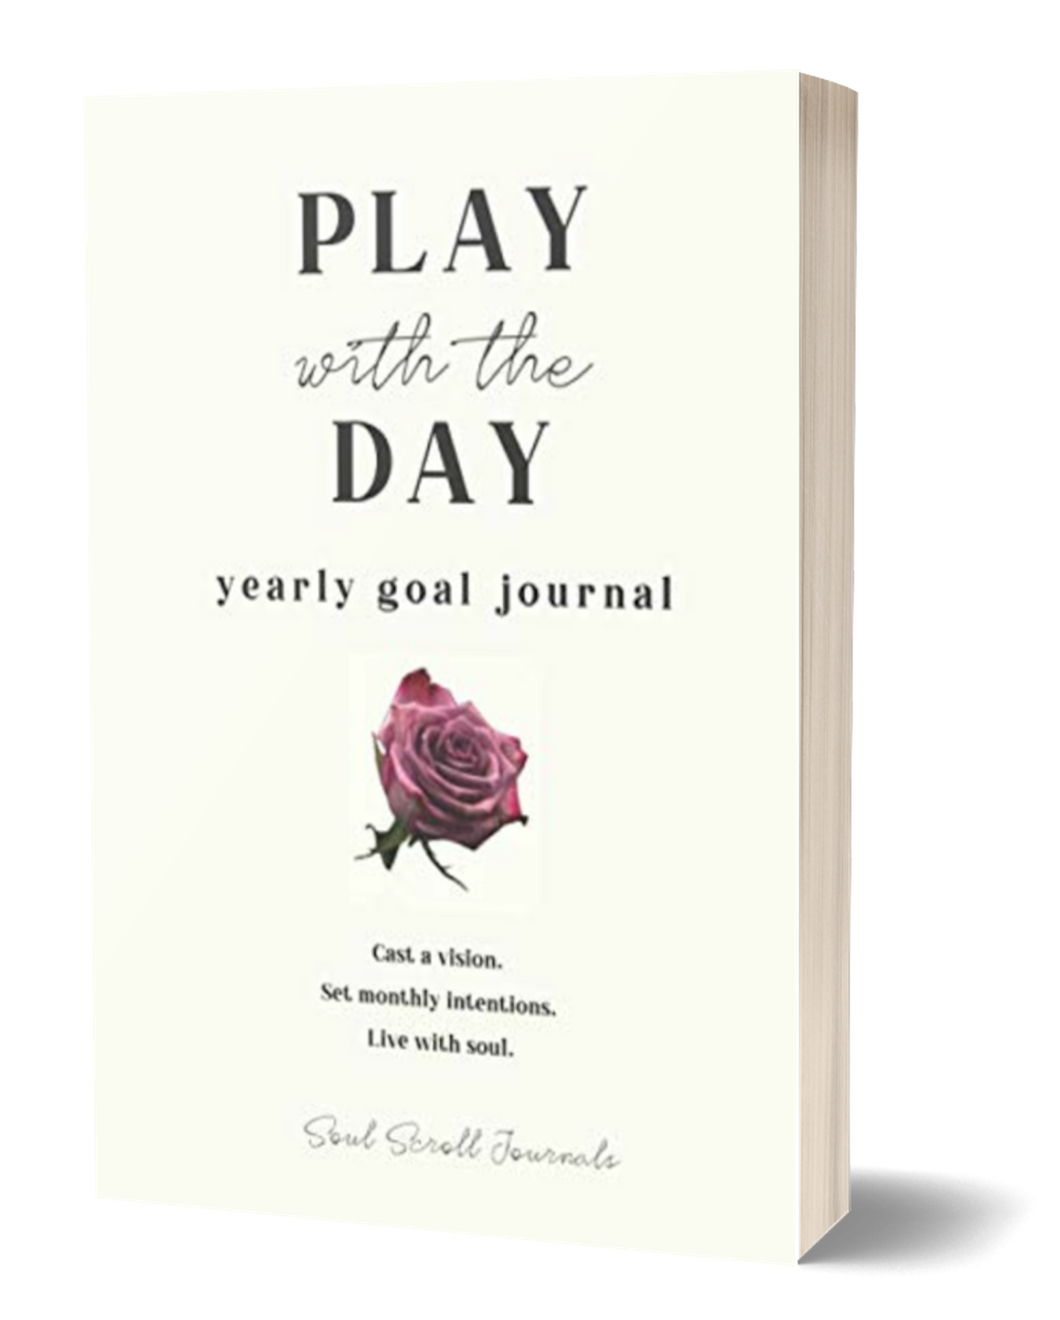 Play with the Day yearly goal journal (Book or PDF)